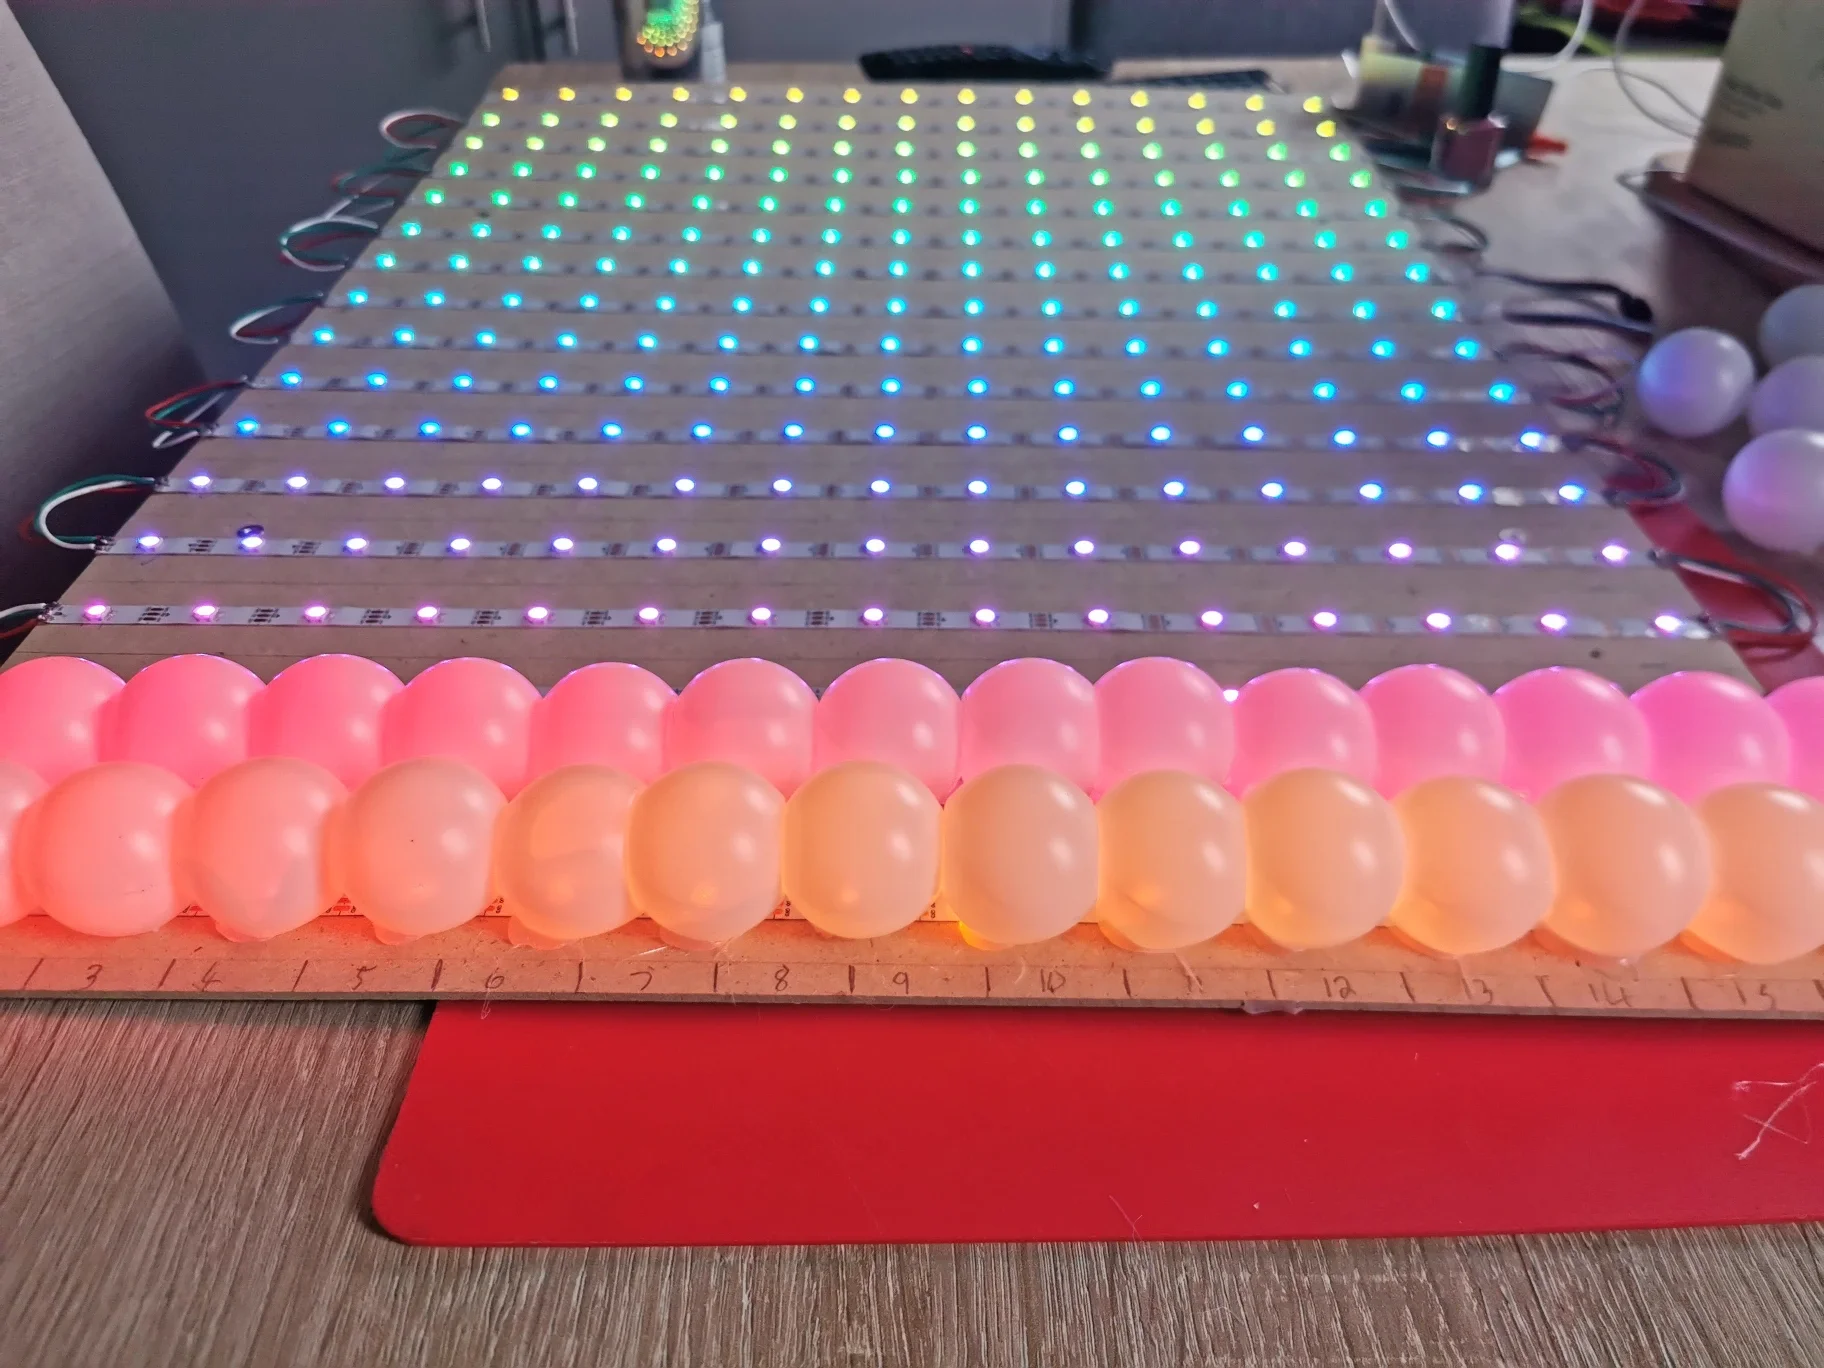 It's a tight fit, but the 40mm ping pong balls fit in a 30mm space just fine.